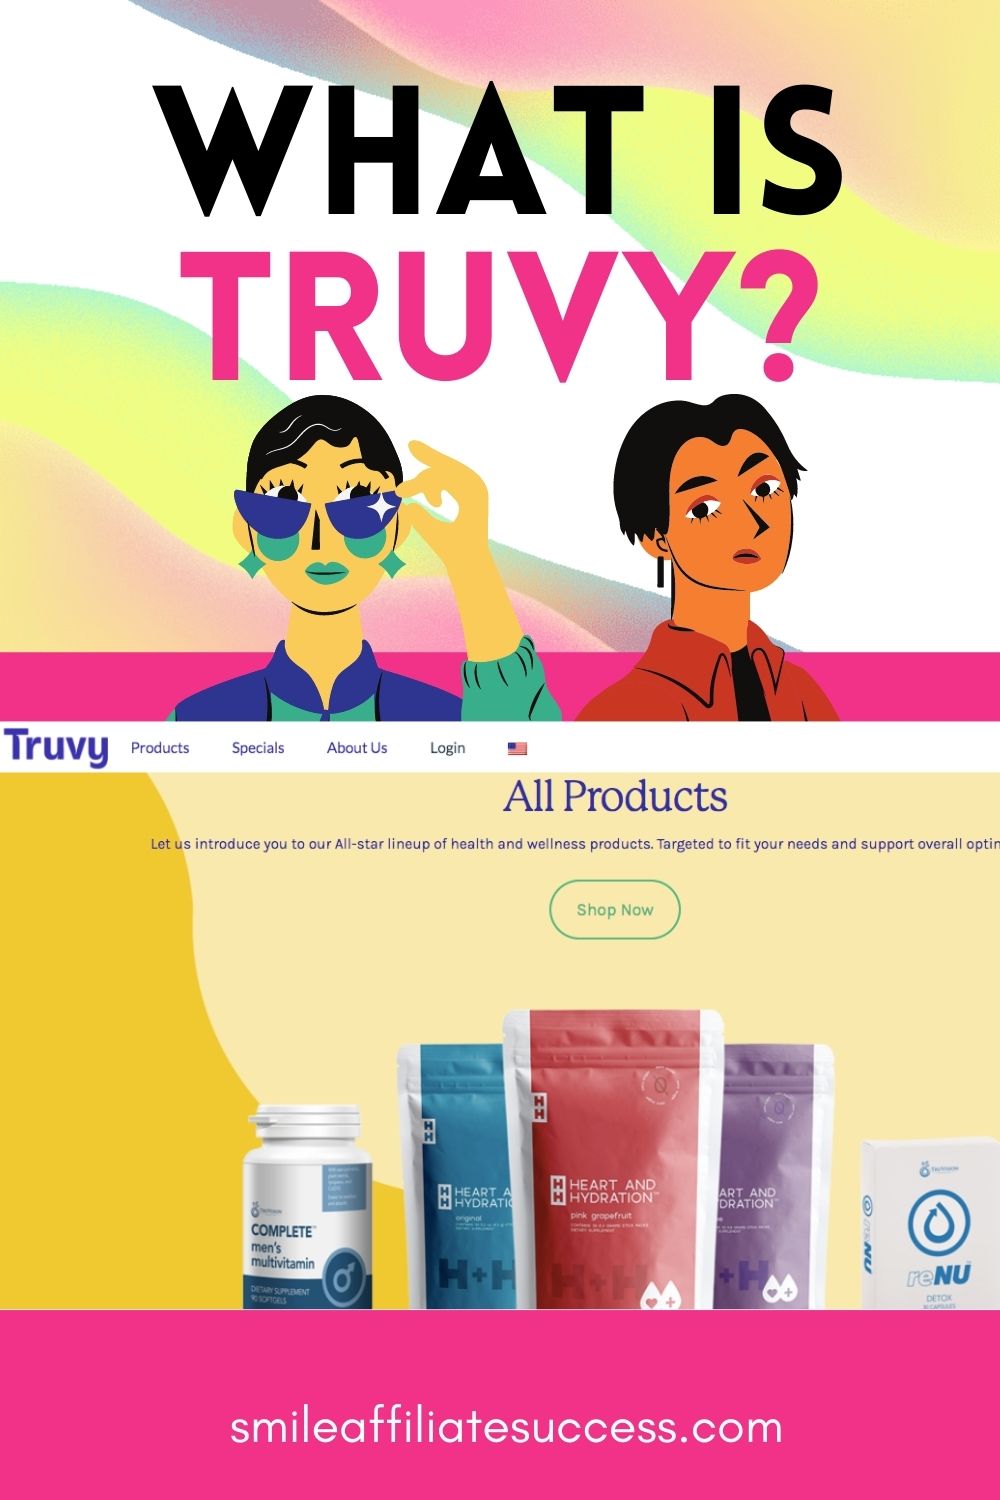 What Is Truvy?